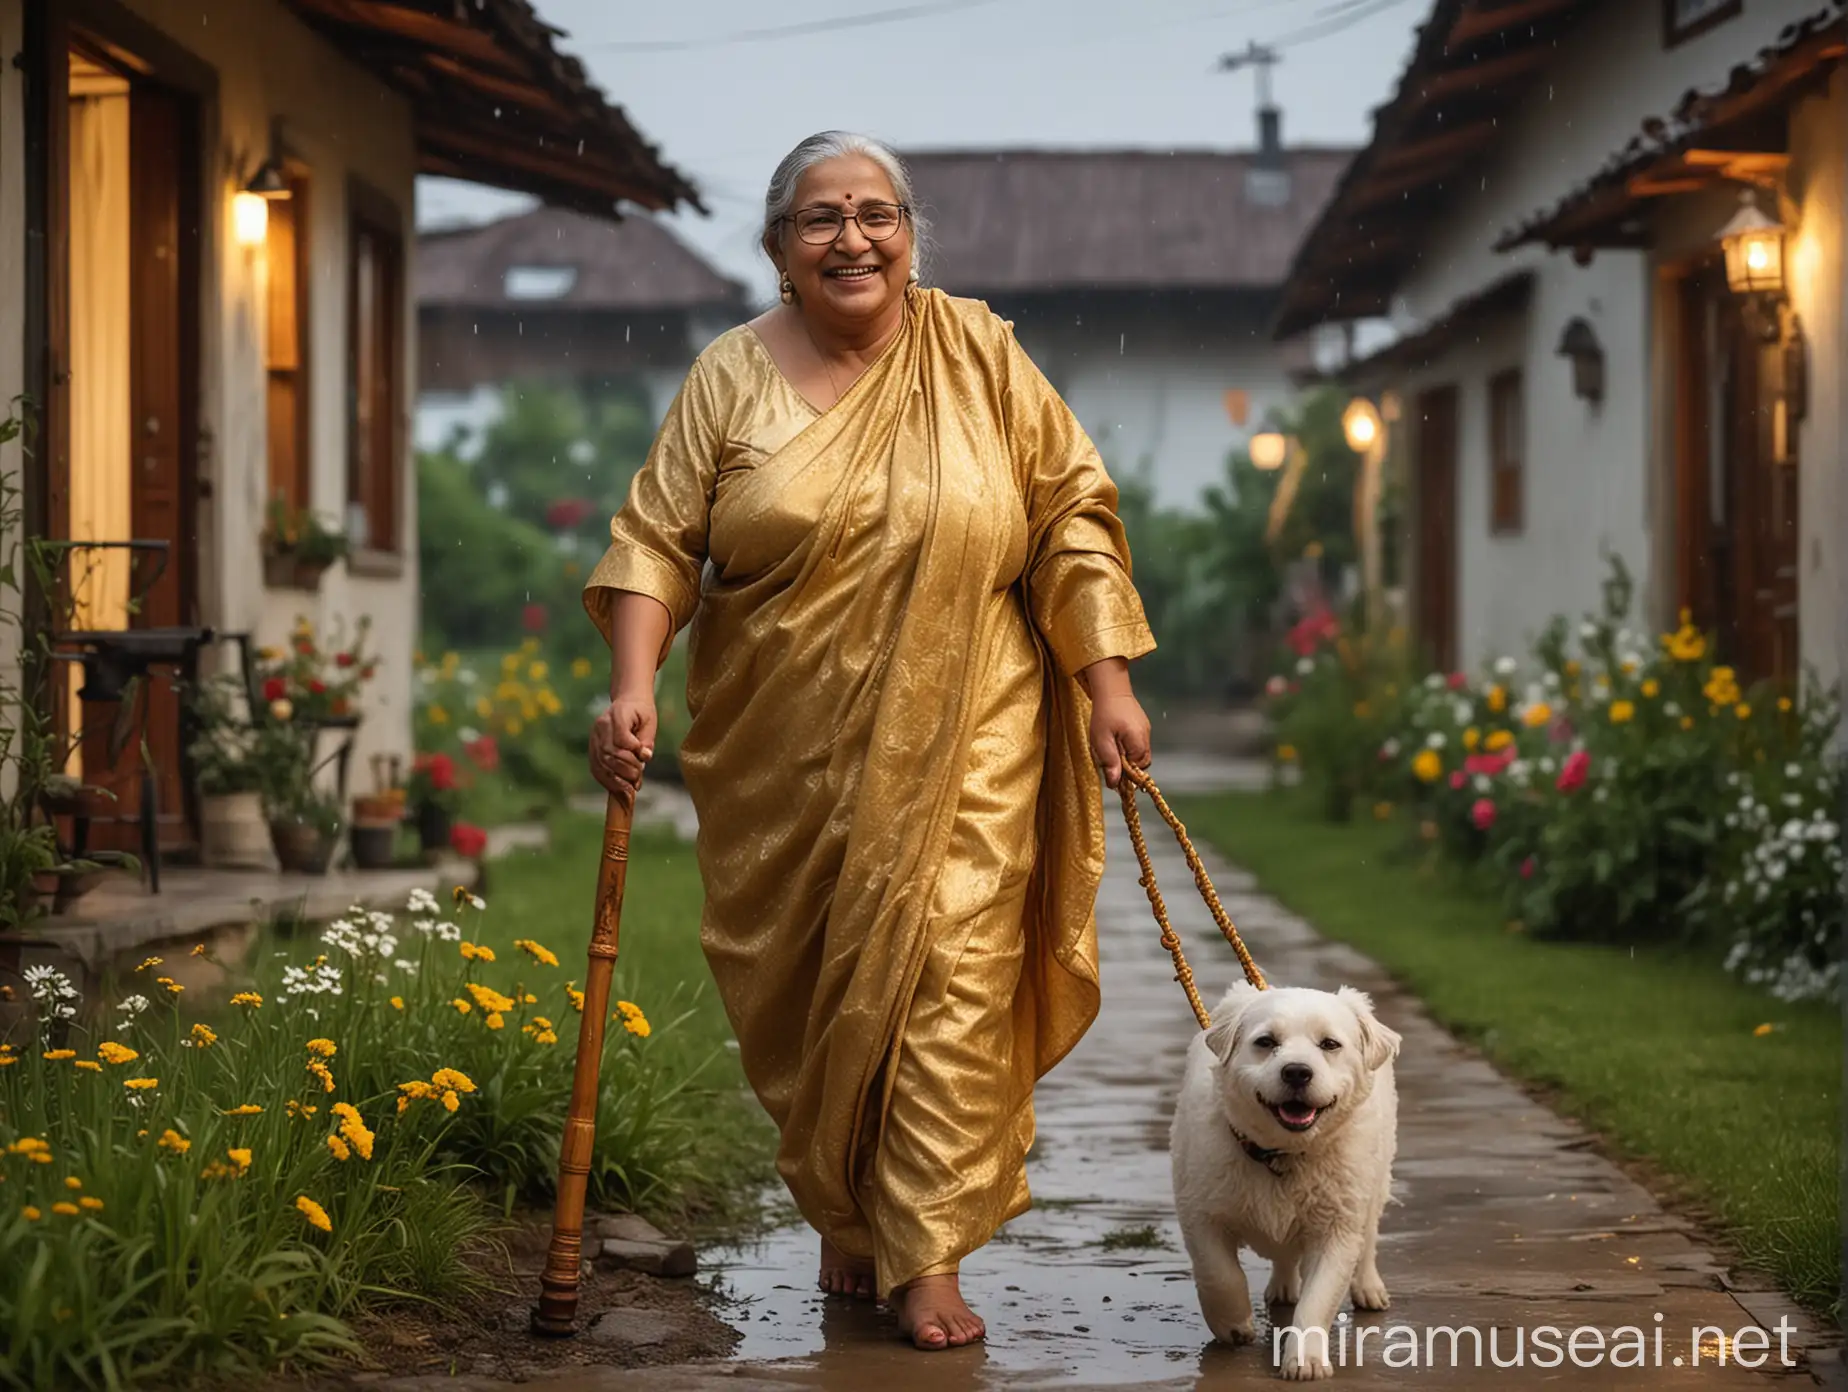 sweet faced old desi  very fat   woman walking with a   wooden walking stick wearing a golden towel  on her body  and a golden neck lace and a spectacles. she is happy and laughing . she is  standing with her dog  . its night  time and in background there is a luxurious farm house  with bulb light and luxurious house   with flowers and grass and concrete floor and its raining. she is wearing golden sleepers on feet.